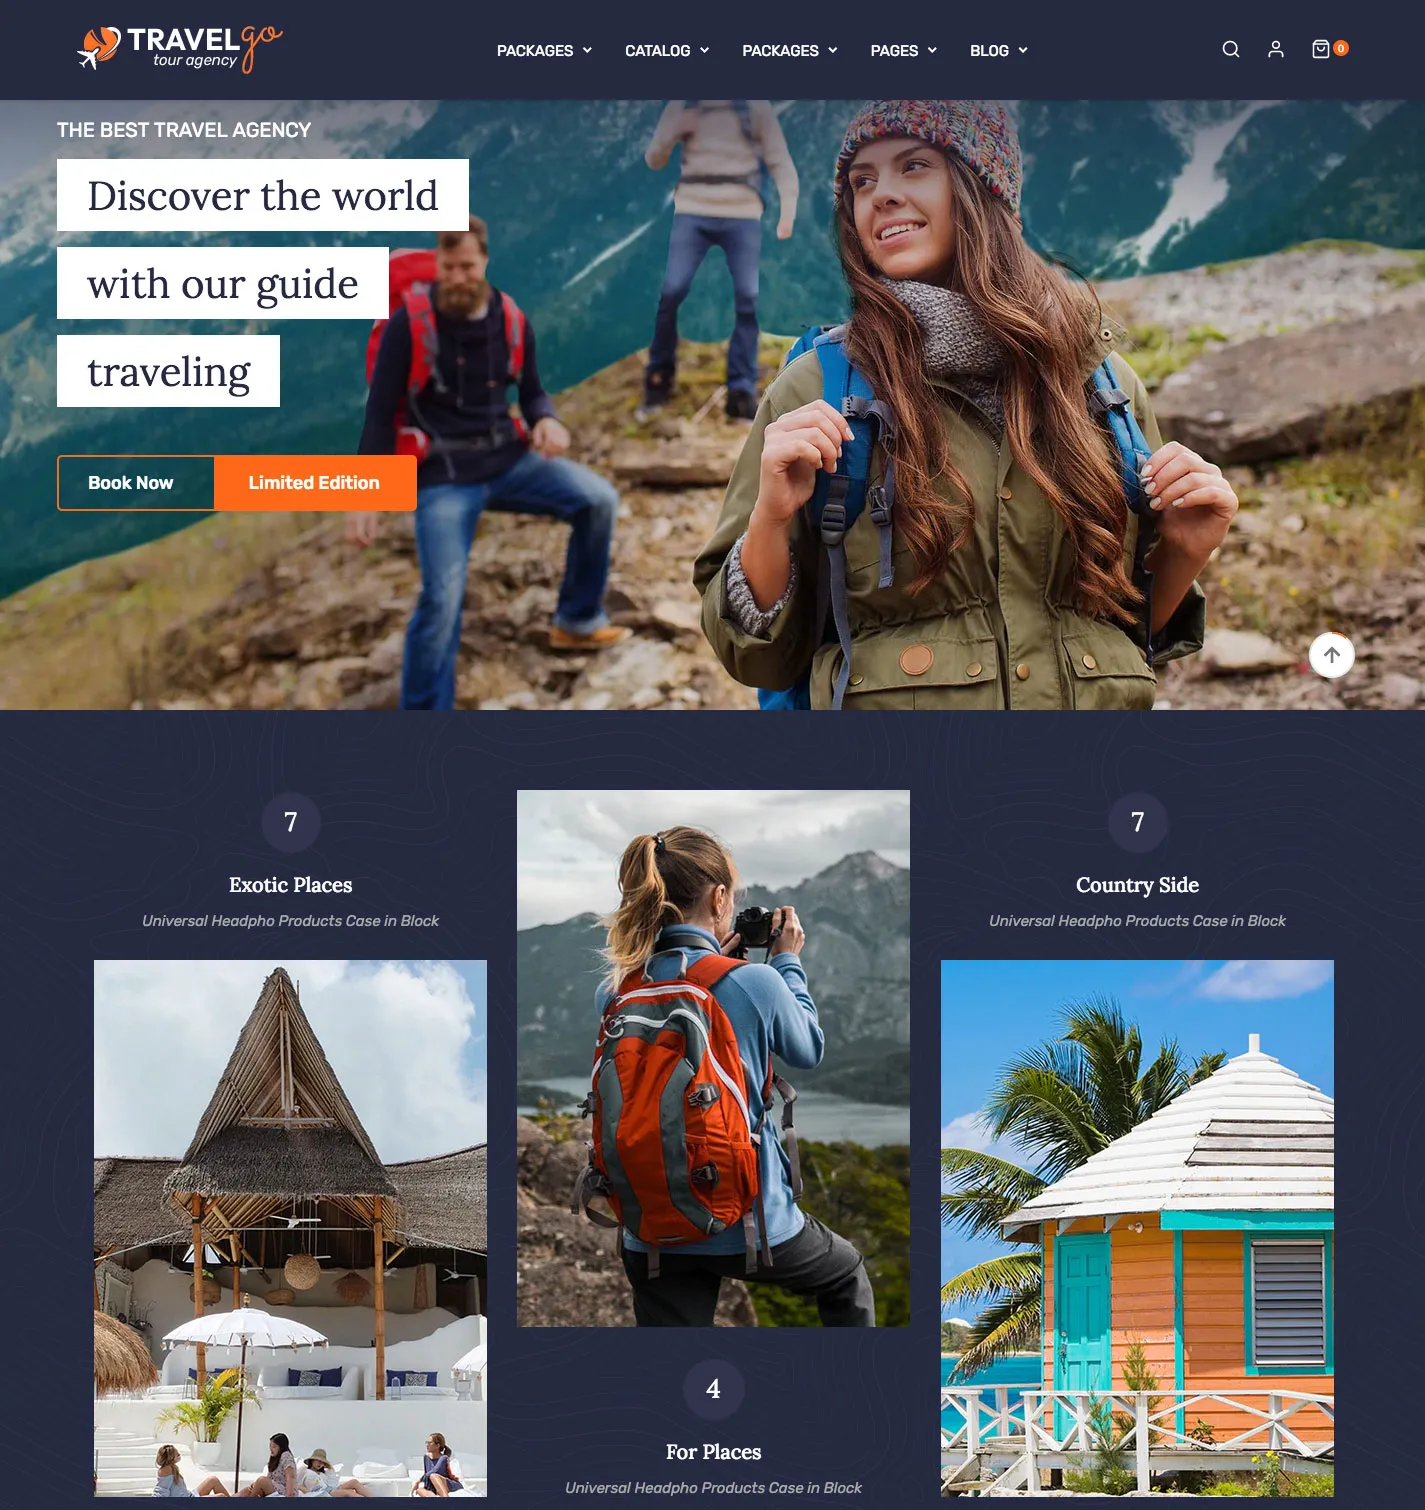 You are currently viewing If you are looking to create a travel website on Shopify, here are some resources that can help: